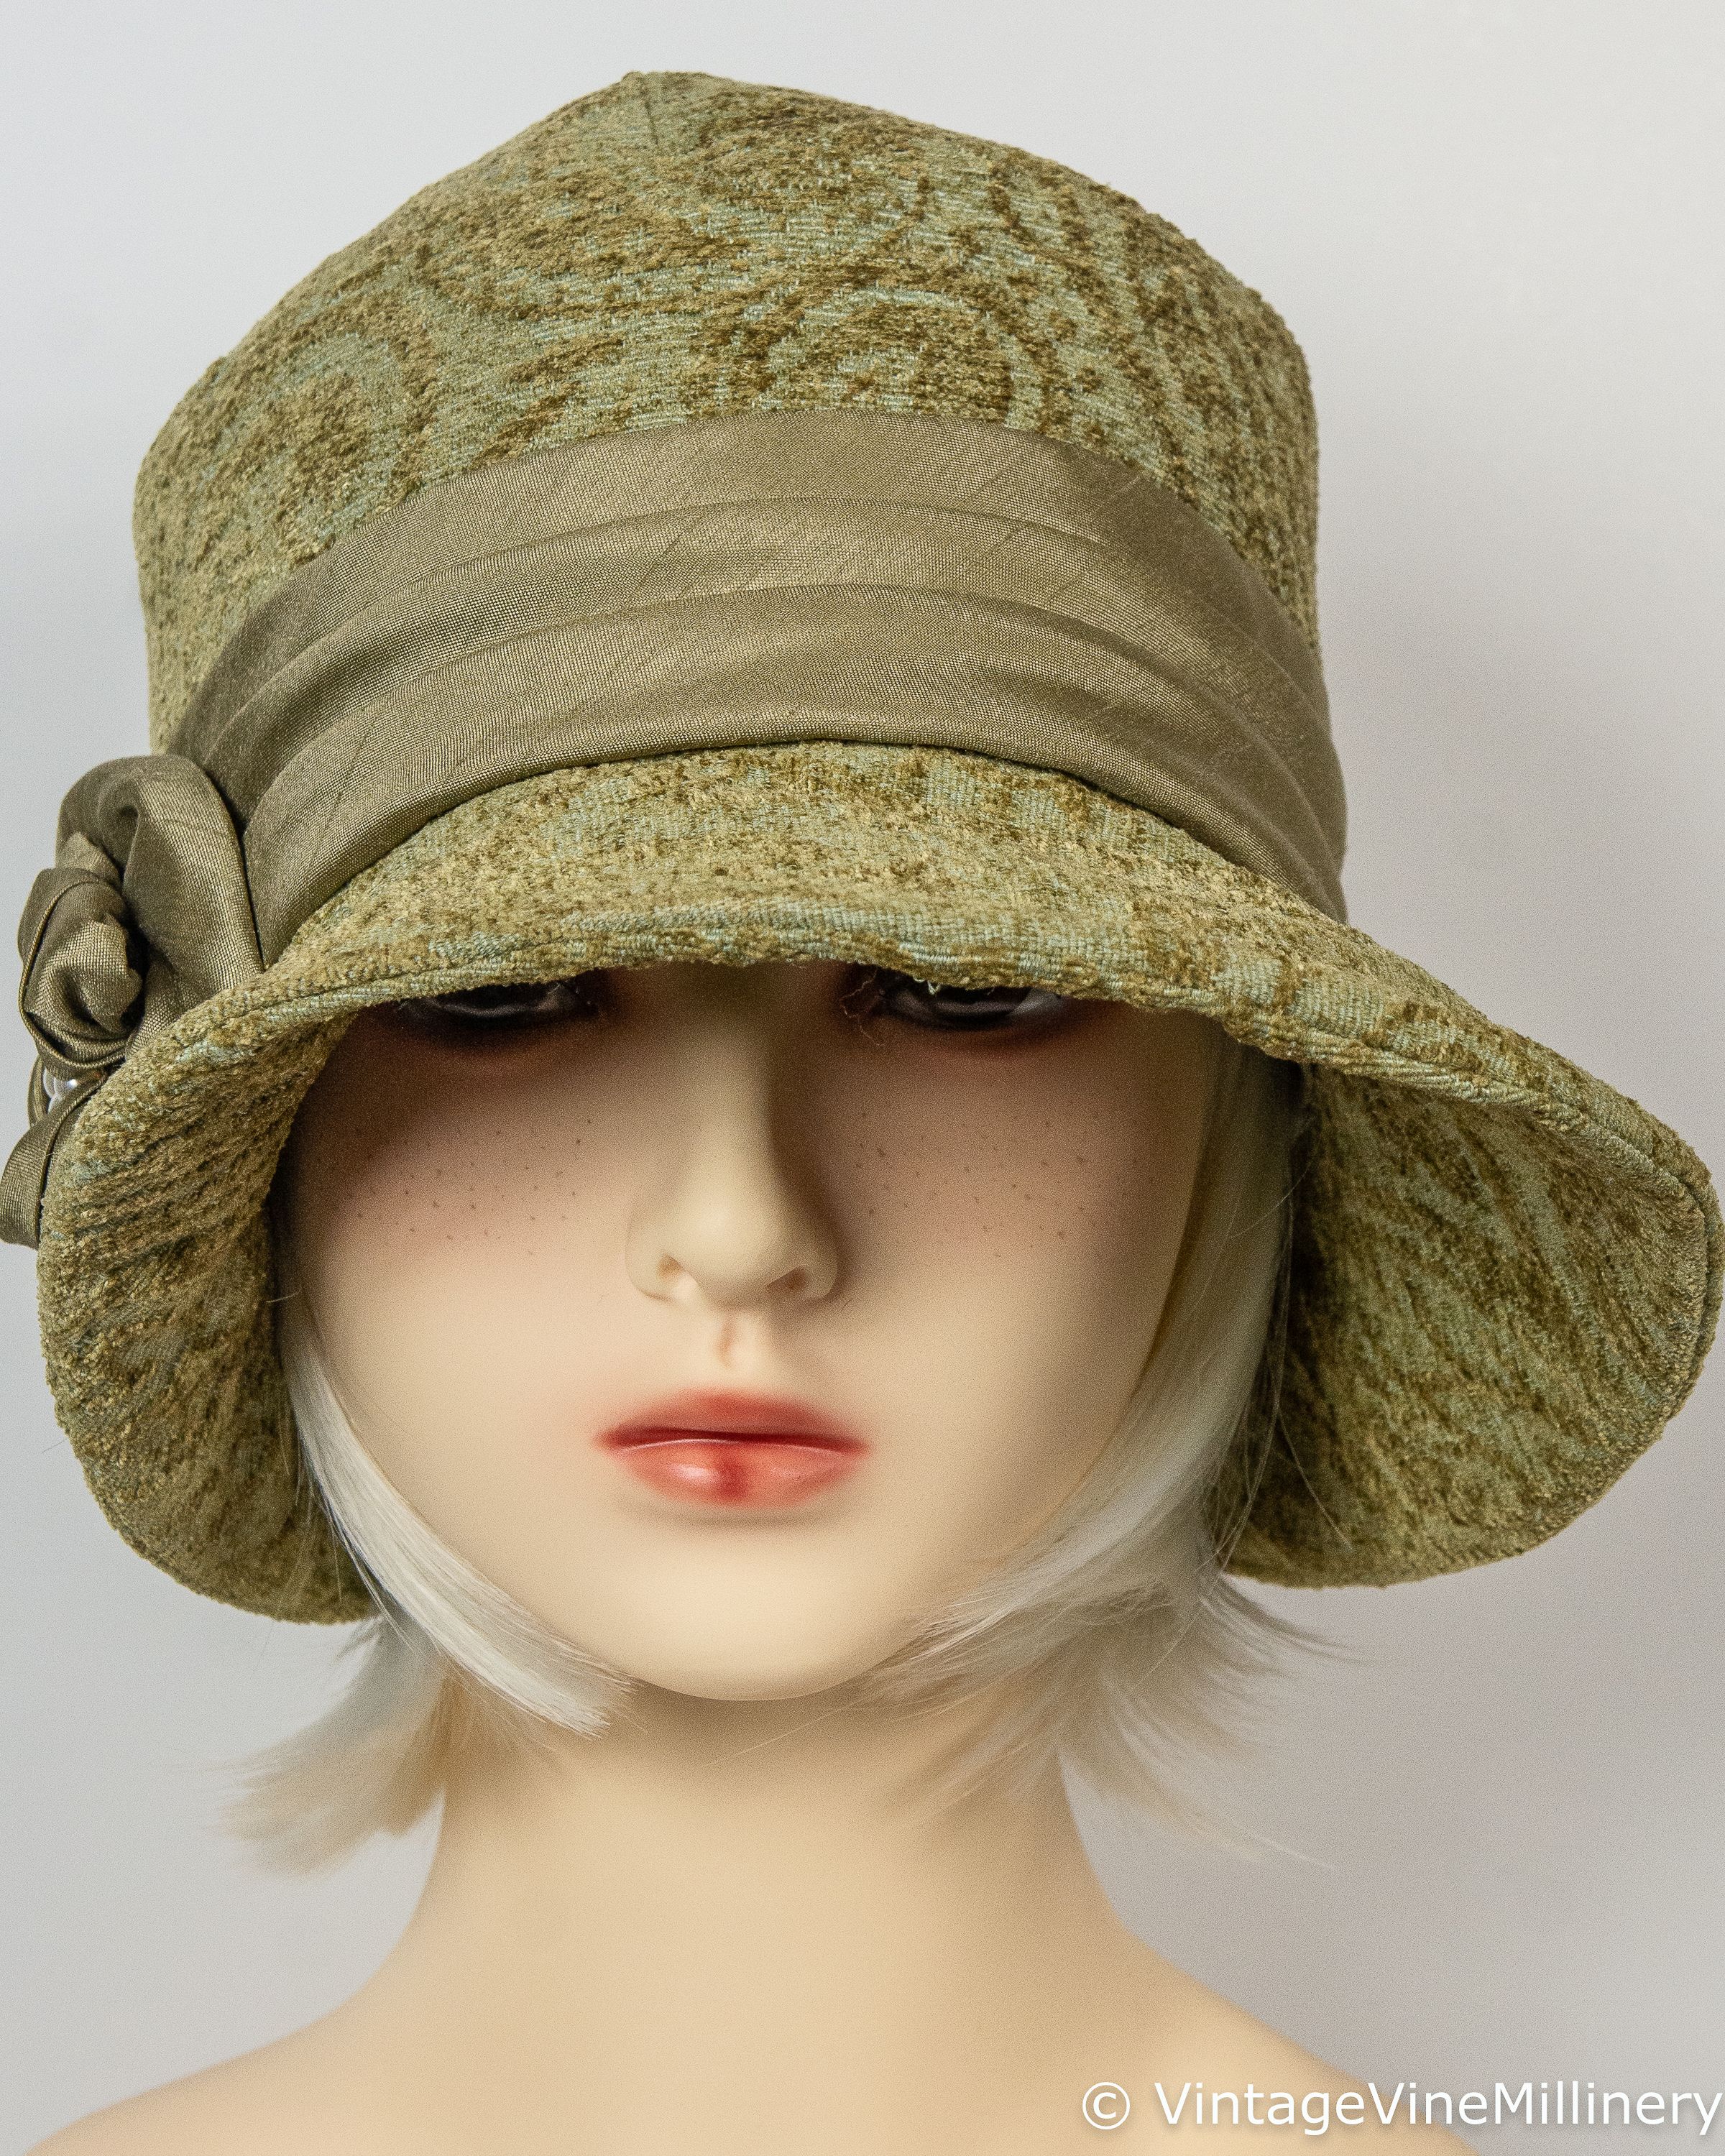 Buy Hand Crafted Sybil's Cloche Hat, made to order from Vintage Vine ...